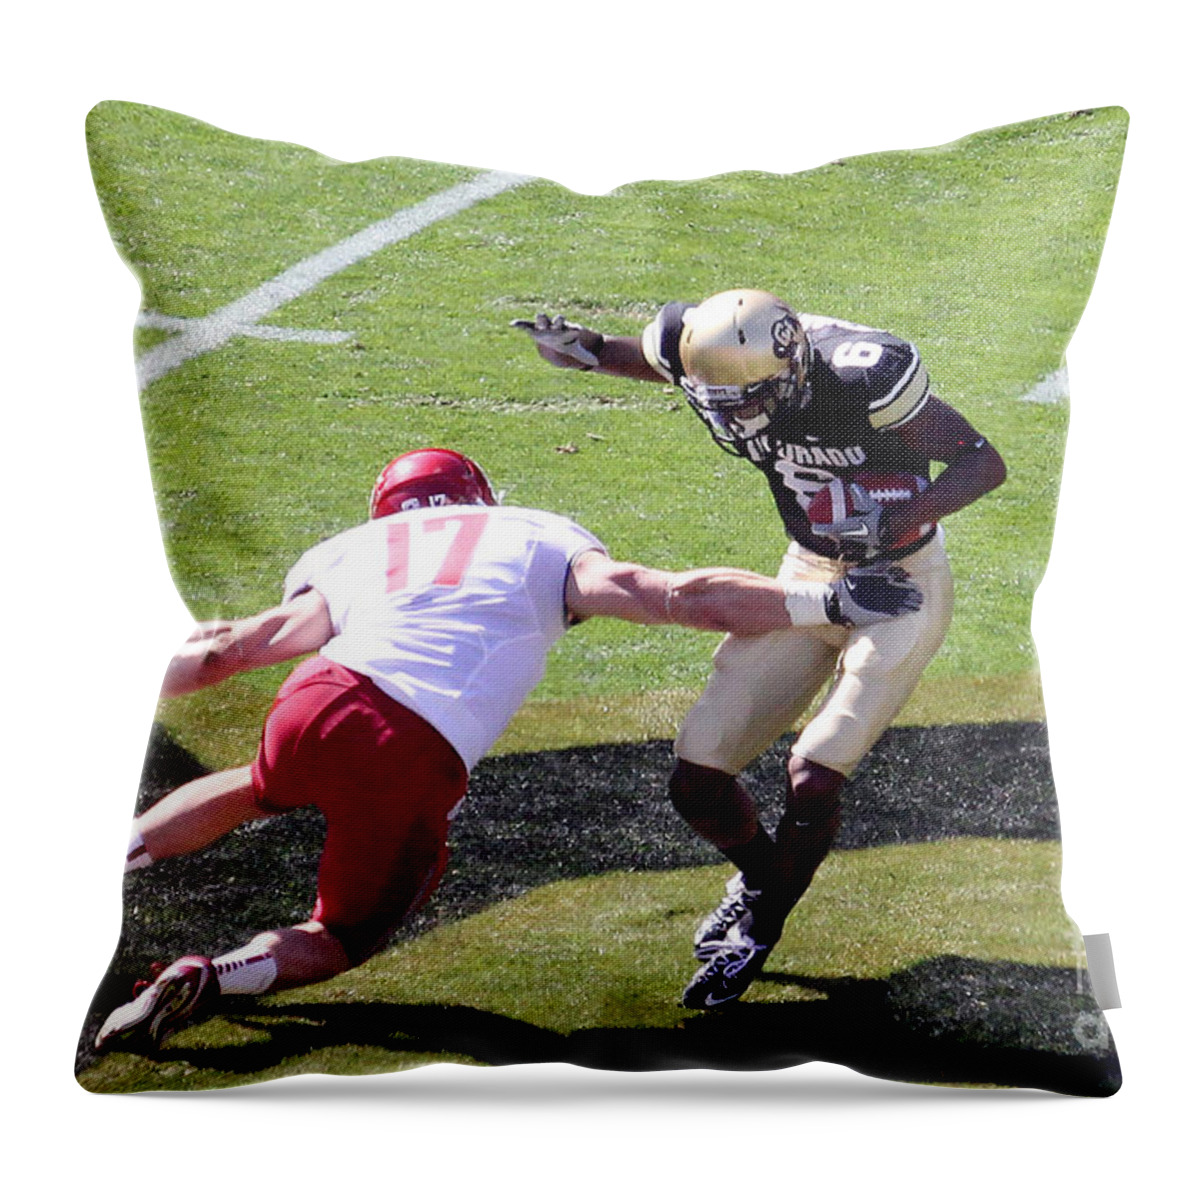 Colorado Throw Pillow featuring the photograph Missed Me by Bob Hislop